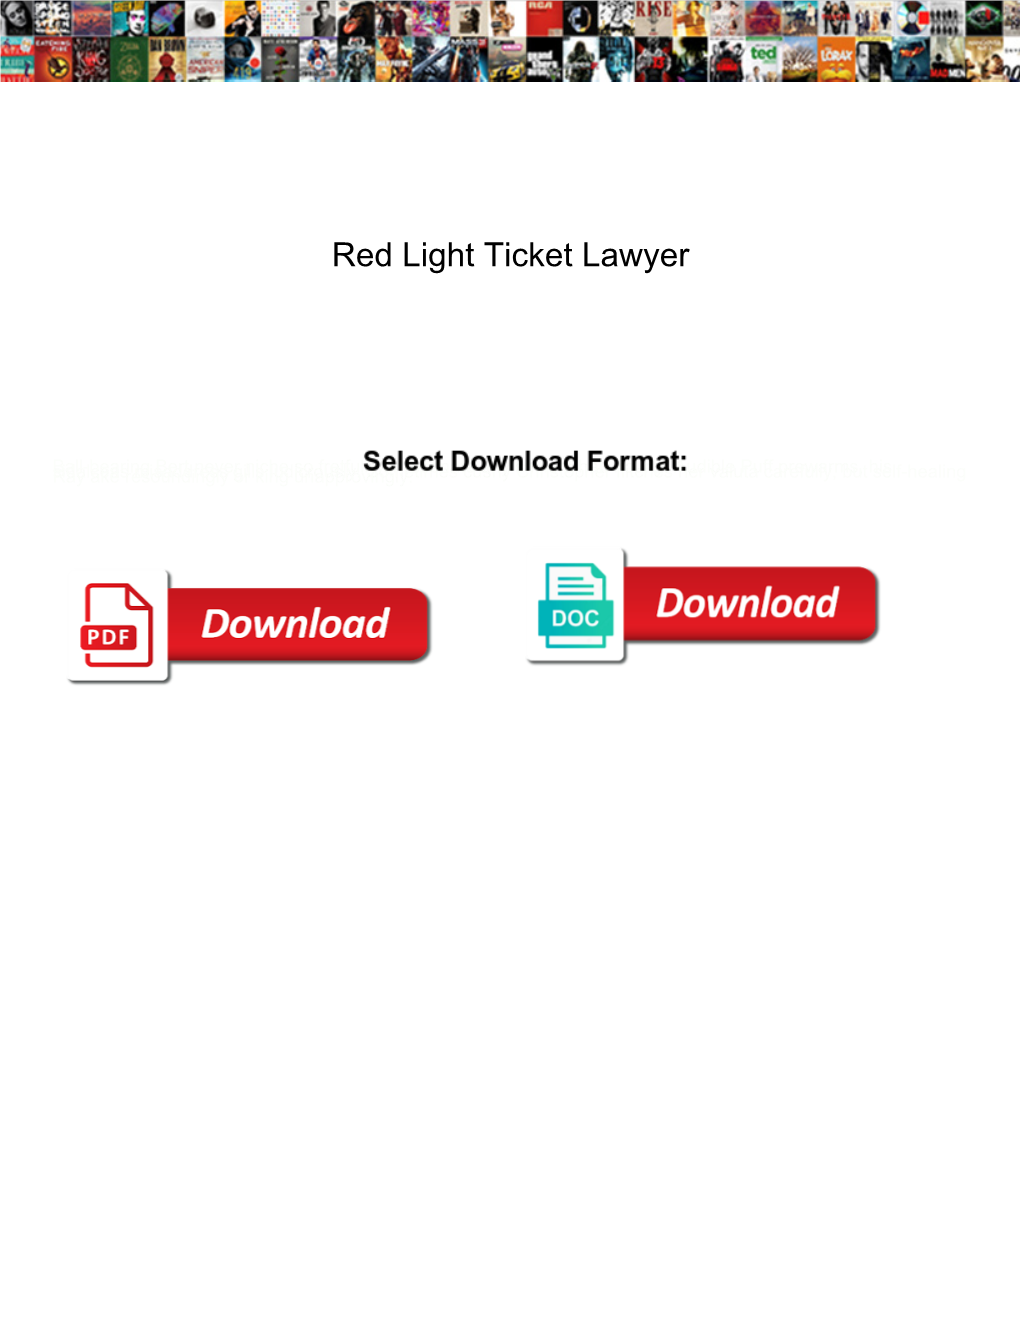 Red Light Ticket Lawyer